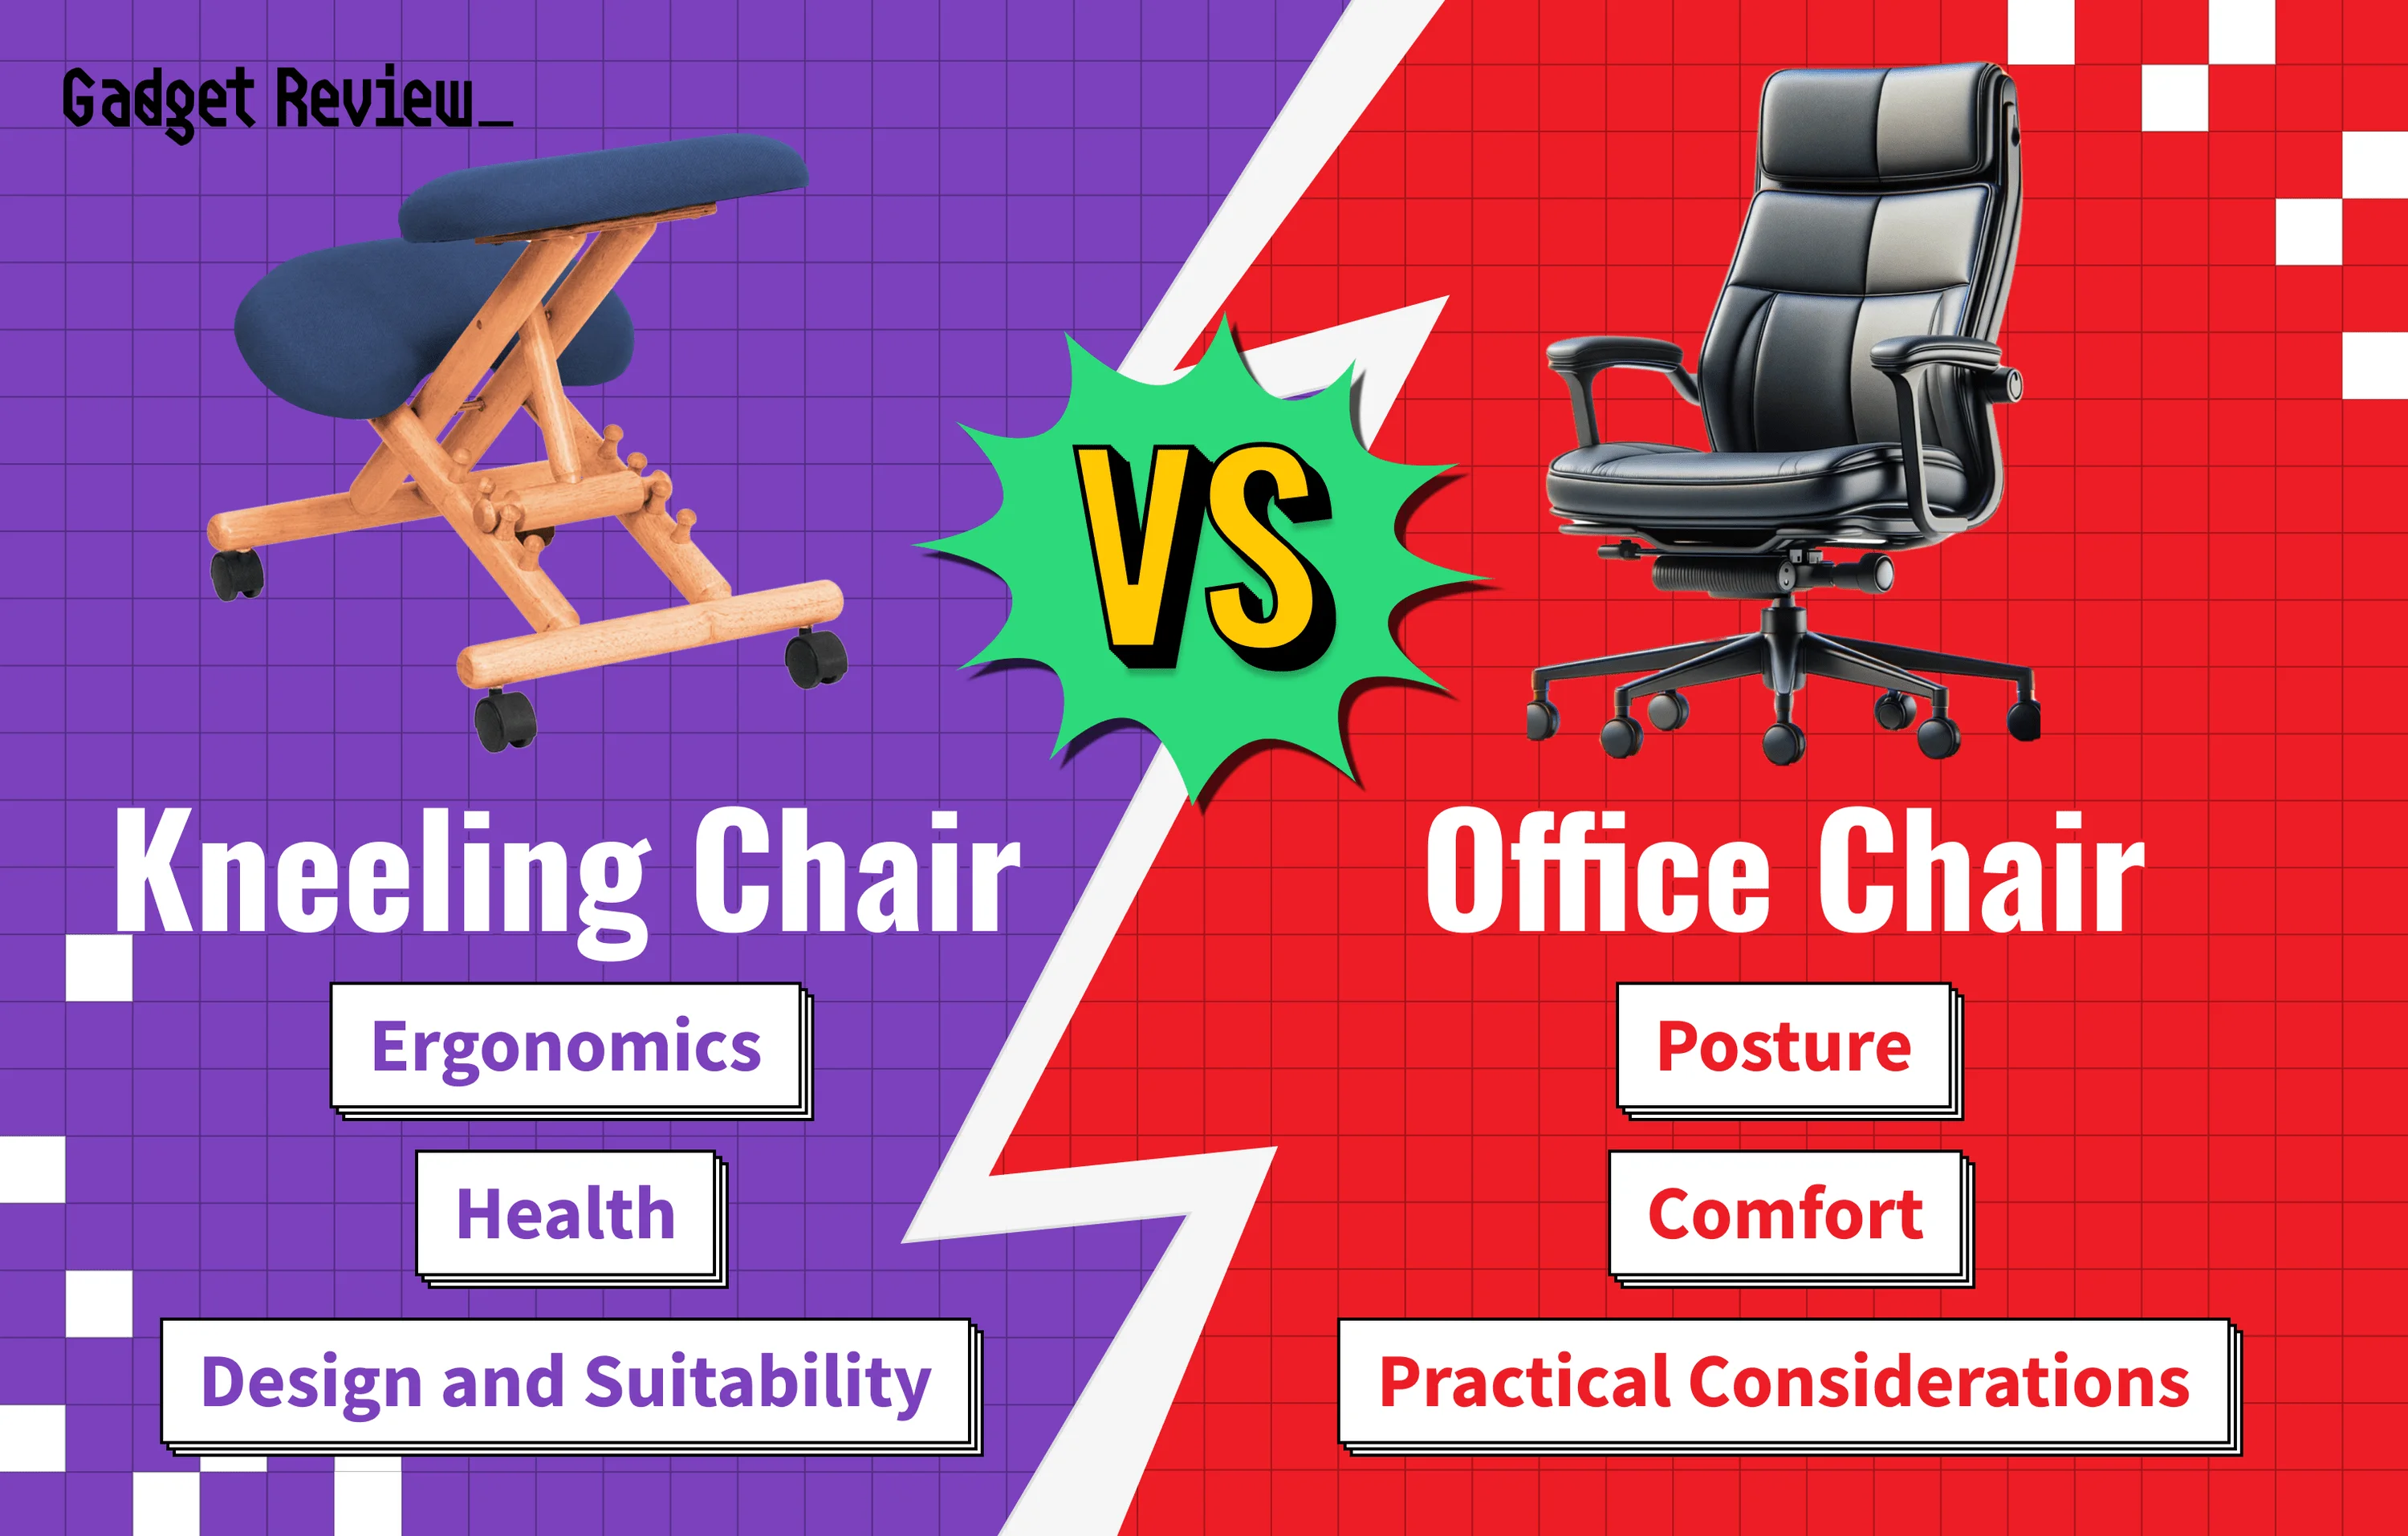 Kneeling Chairs vs Office Chairs